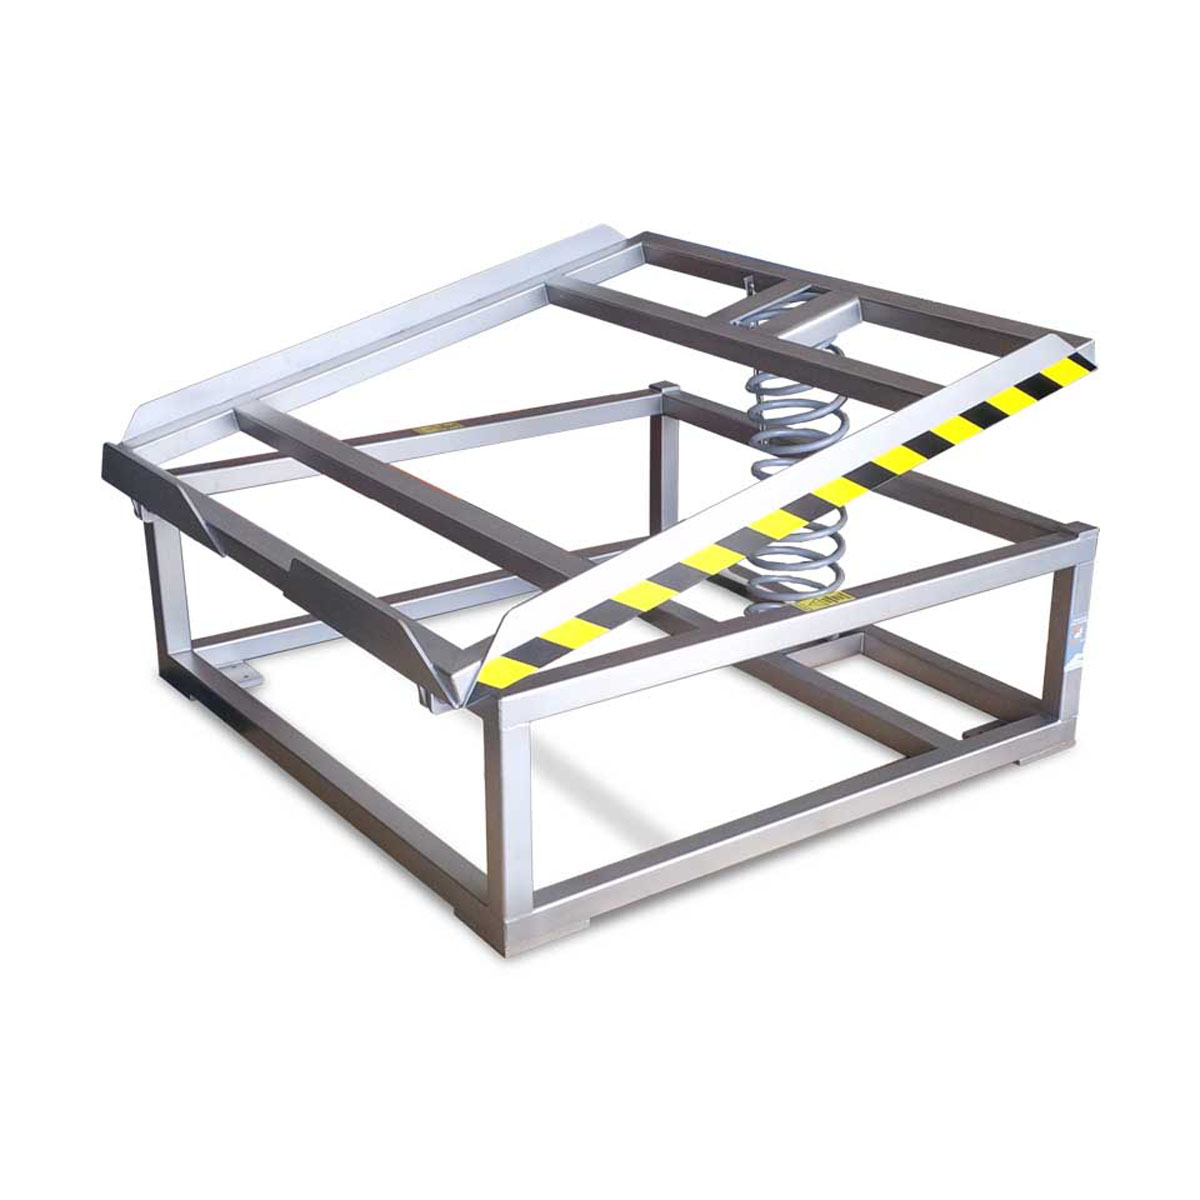 Buy Tilting Lift Table (Spring - Stainless Steel) available at Astrolift NZ